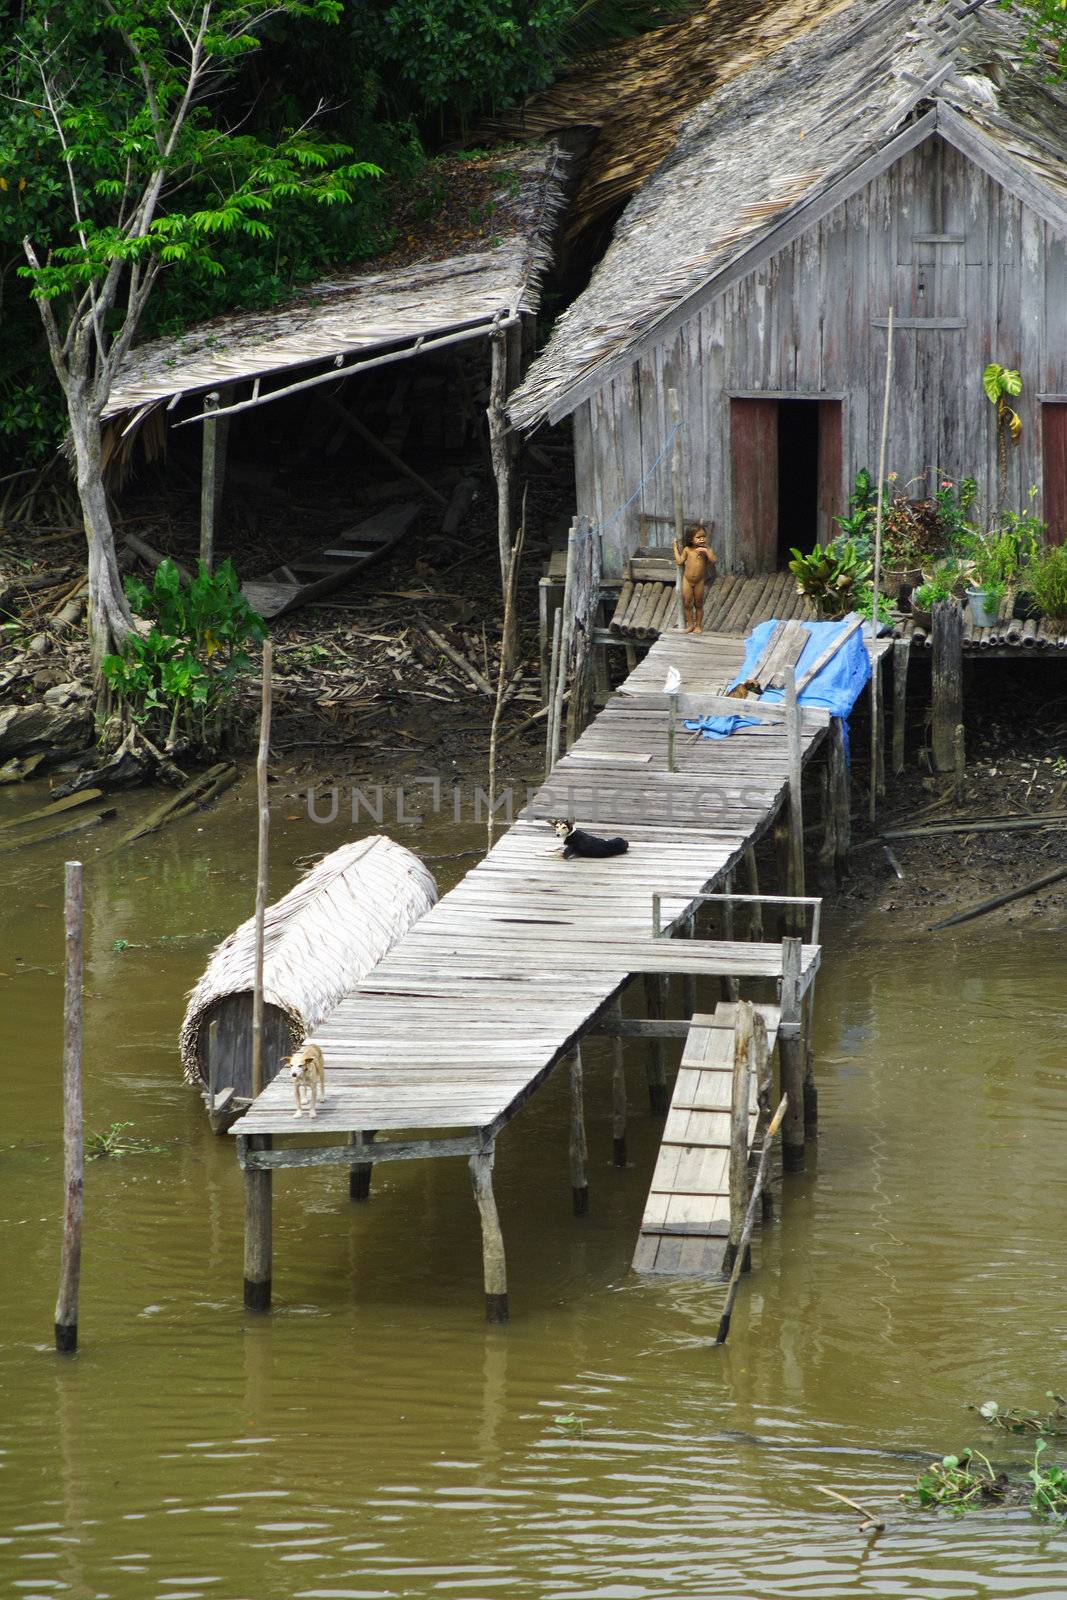 A small hut next to the Amazon River.